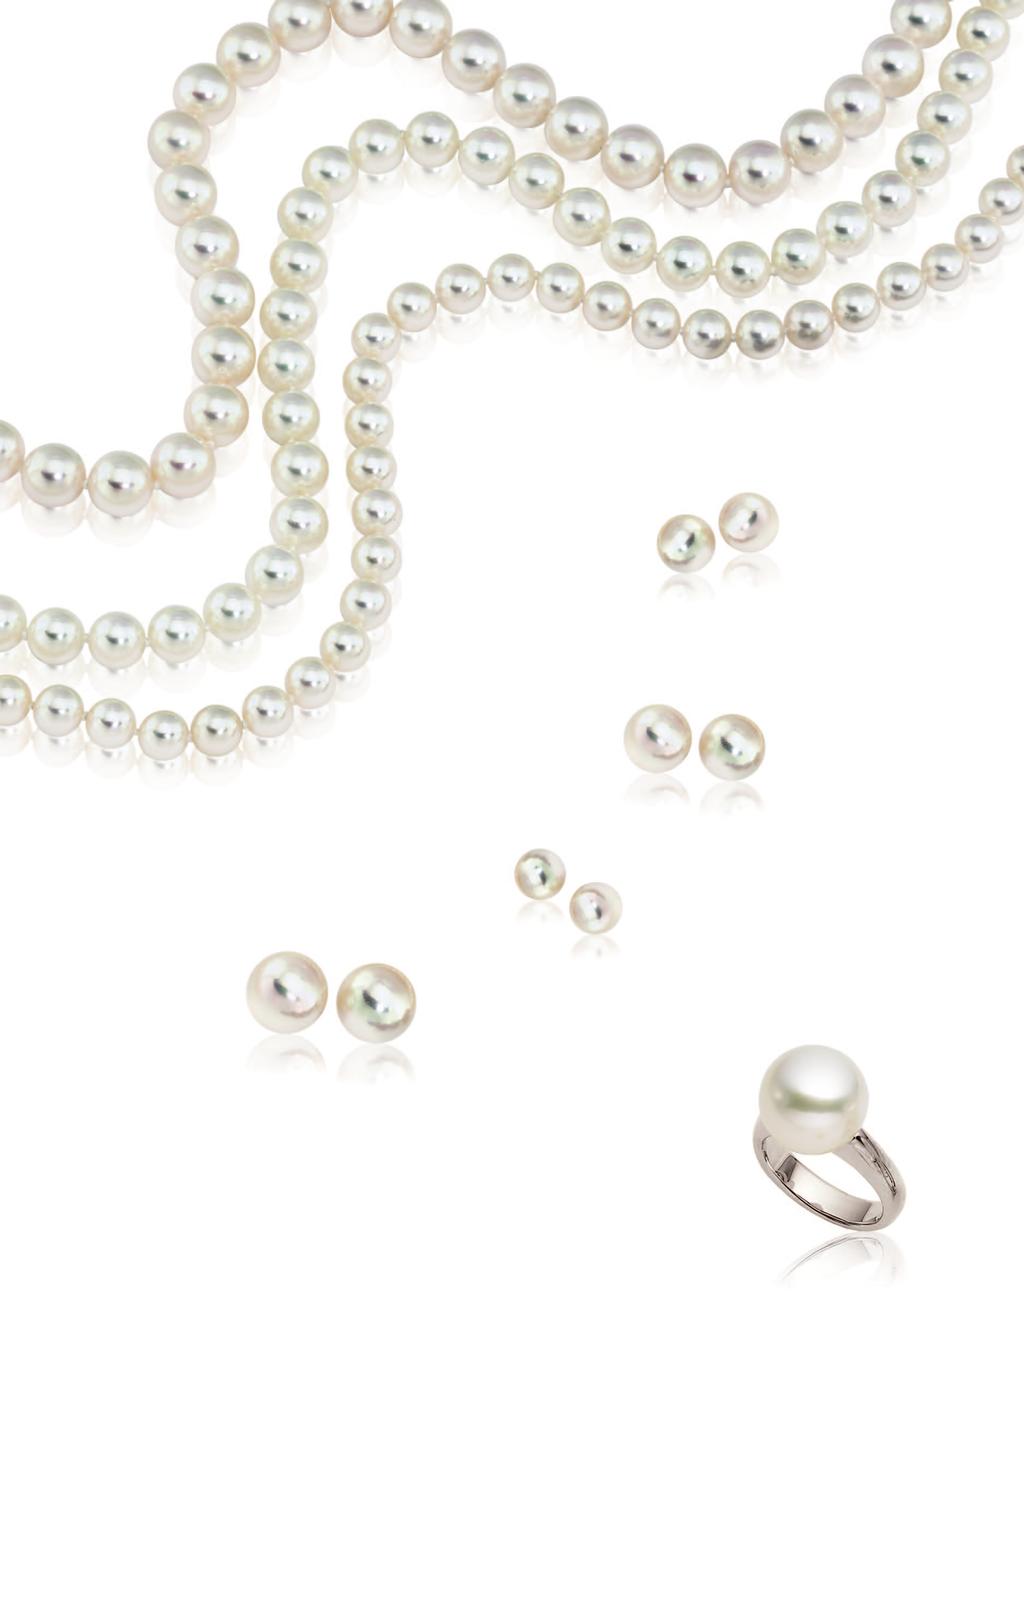 Lustrous ultured Pearl Necklaces, in a variety of sizes and lengths, priced from $250.